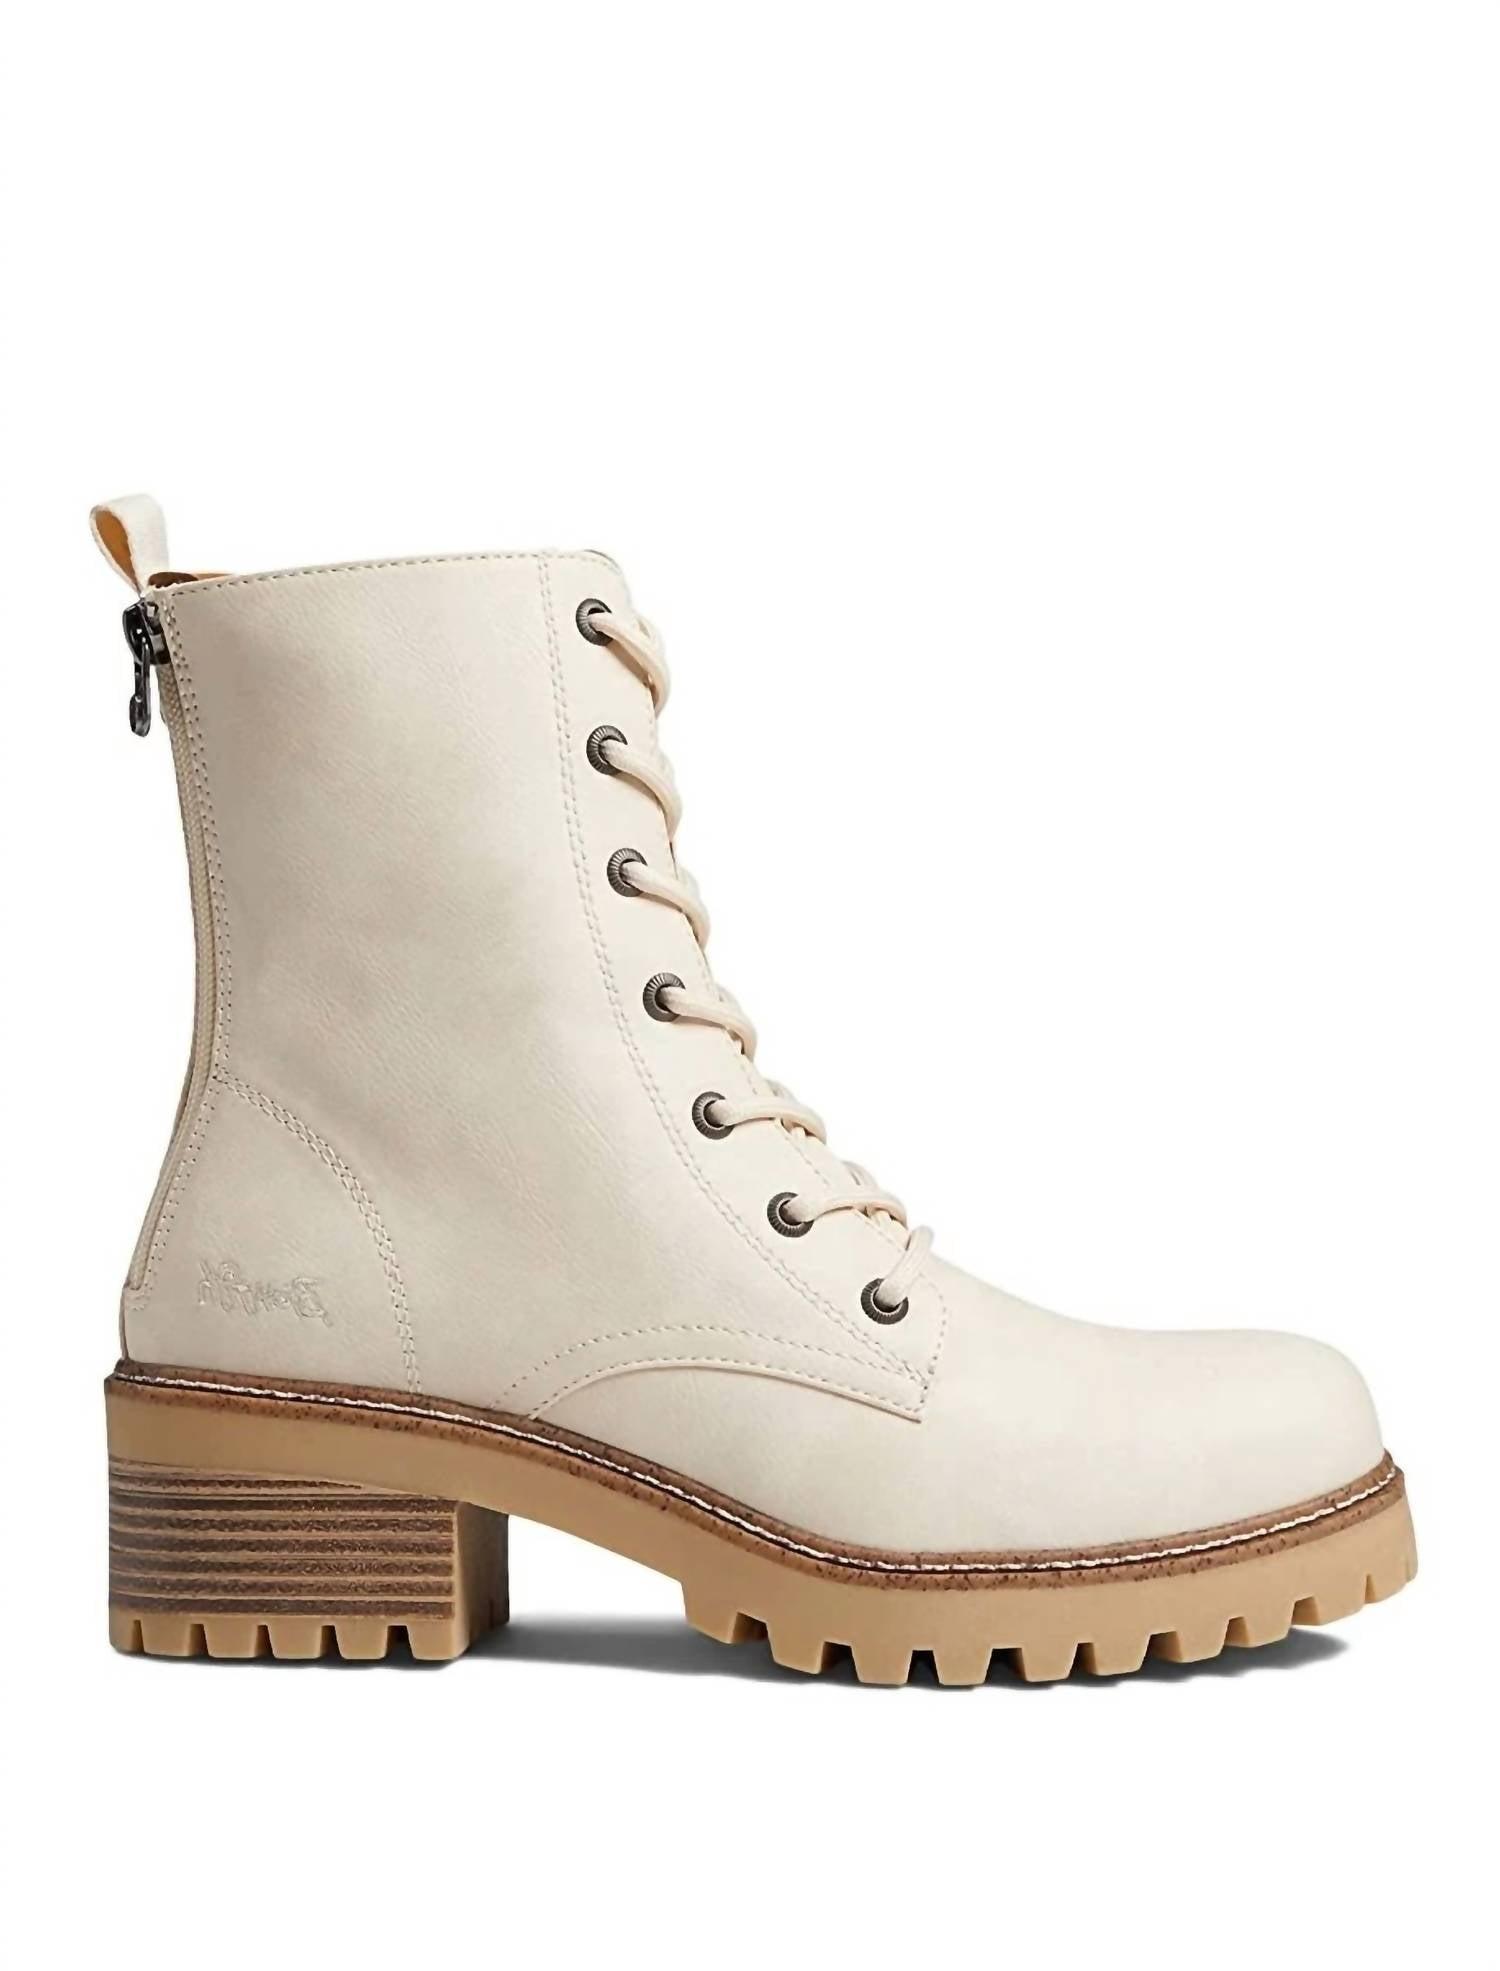 Blowfish Leith Combat Boot in Natural | Lyst